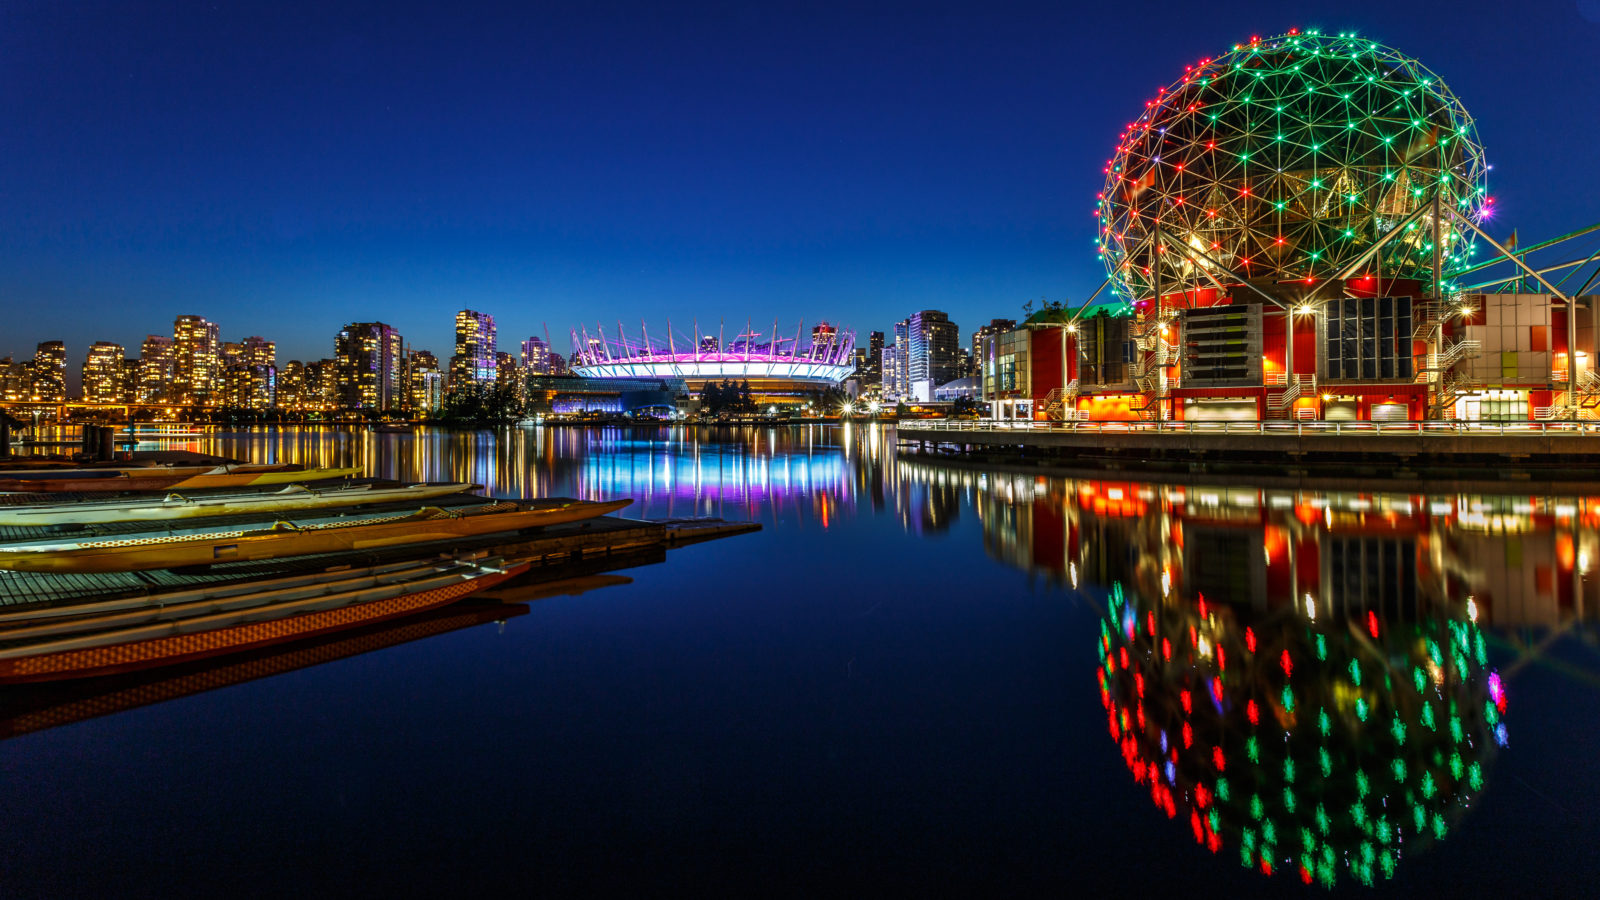 Science World and BC Olympic Place illuminated at night in Vancouver, Canada